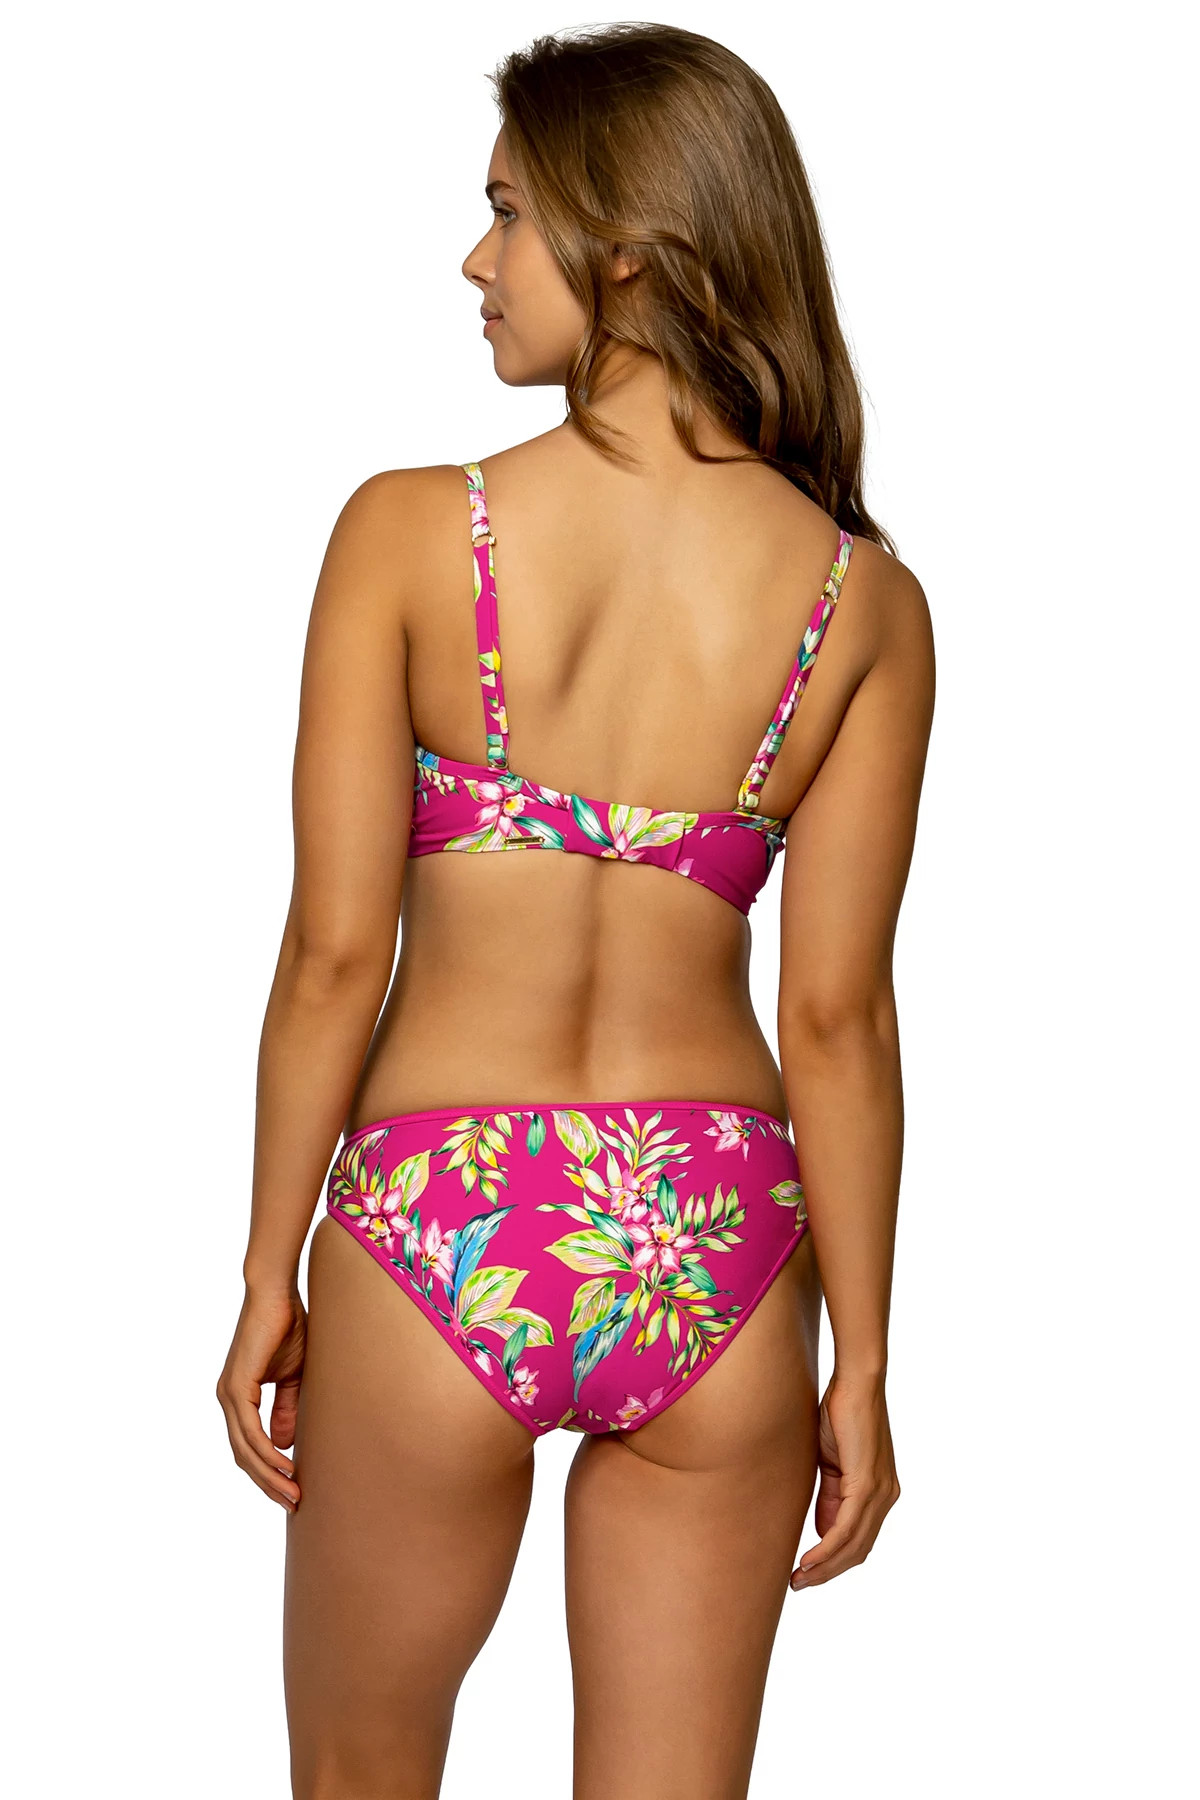 ORCHID OASIS Crossroads Underwire Bikini Top (D+ Cup) image number 2